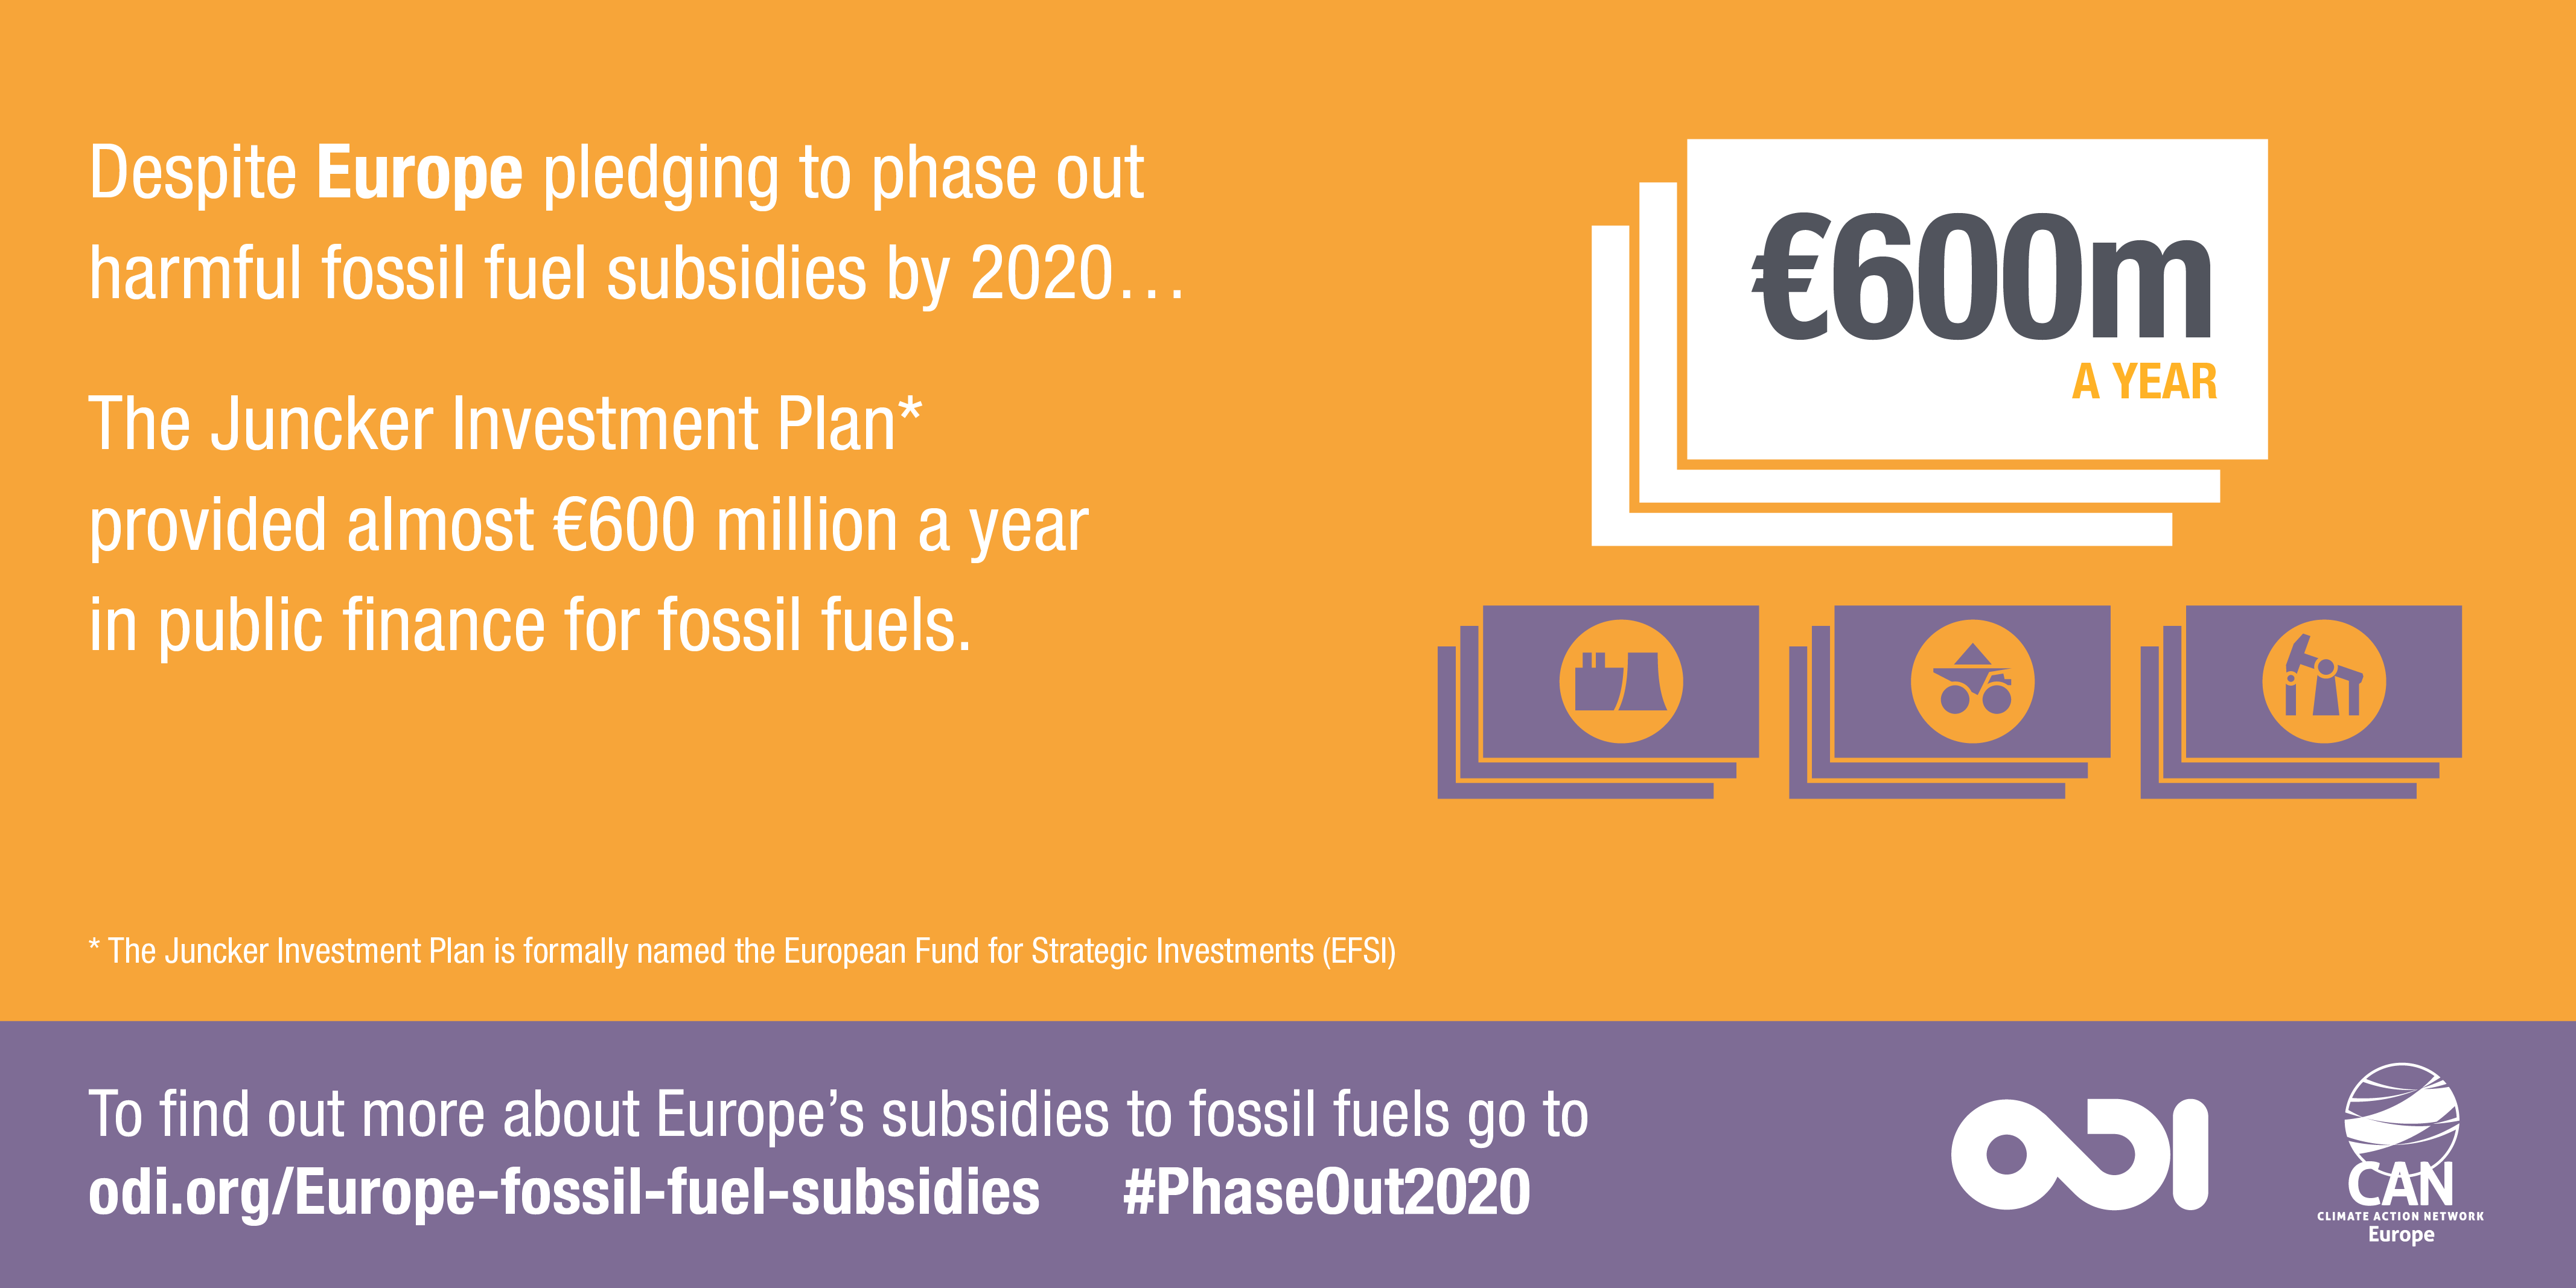 The Juncker Investment Plan provided over €600 million a year in public finance for fossil fuels. Image: Overseas Development Institute